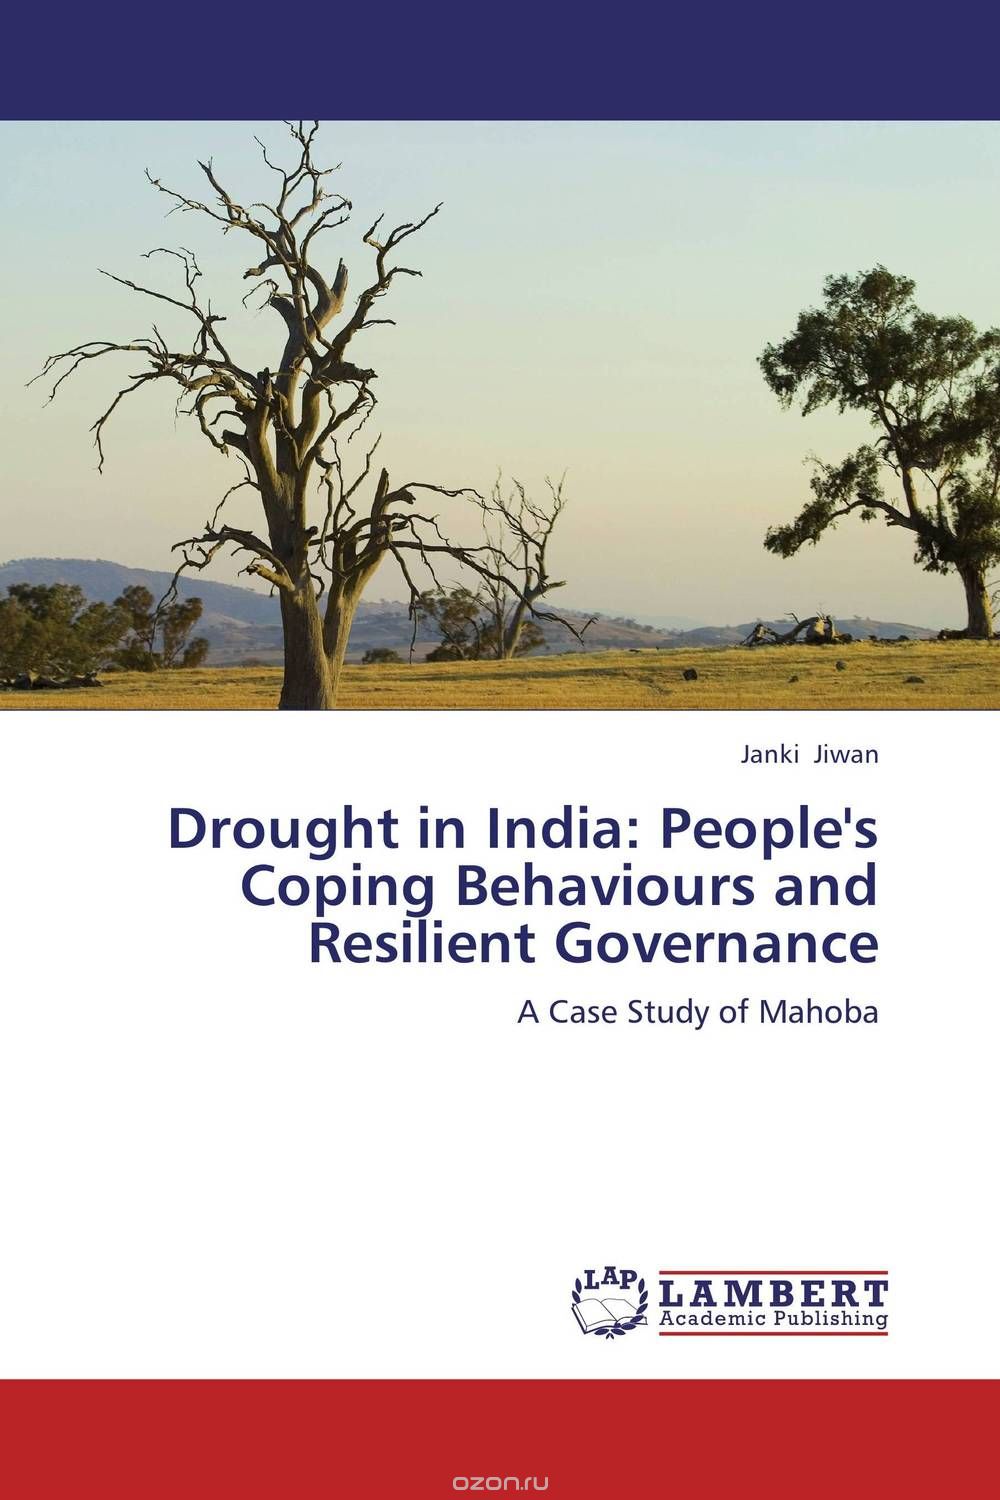 Drought in India: People's Coping Behaviours and Resilient Governance